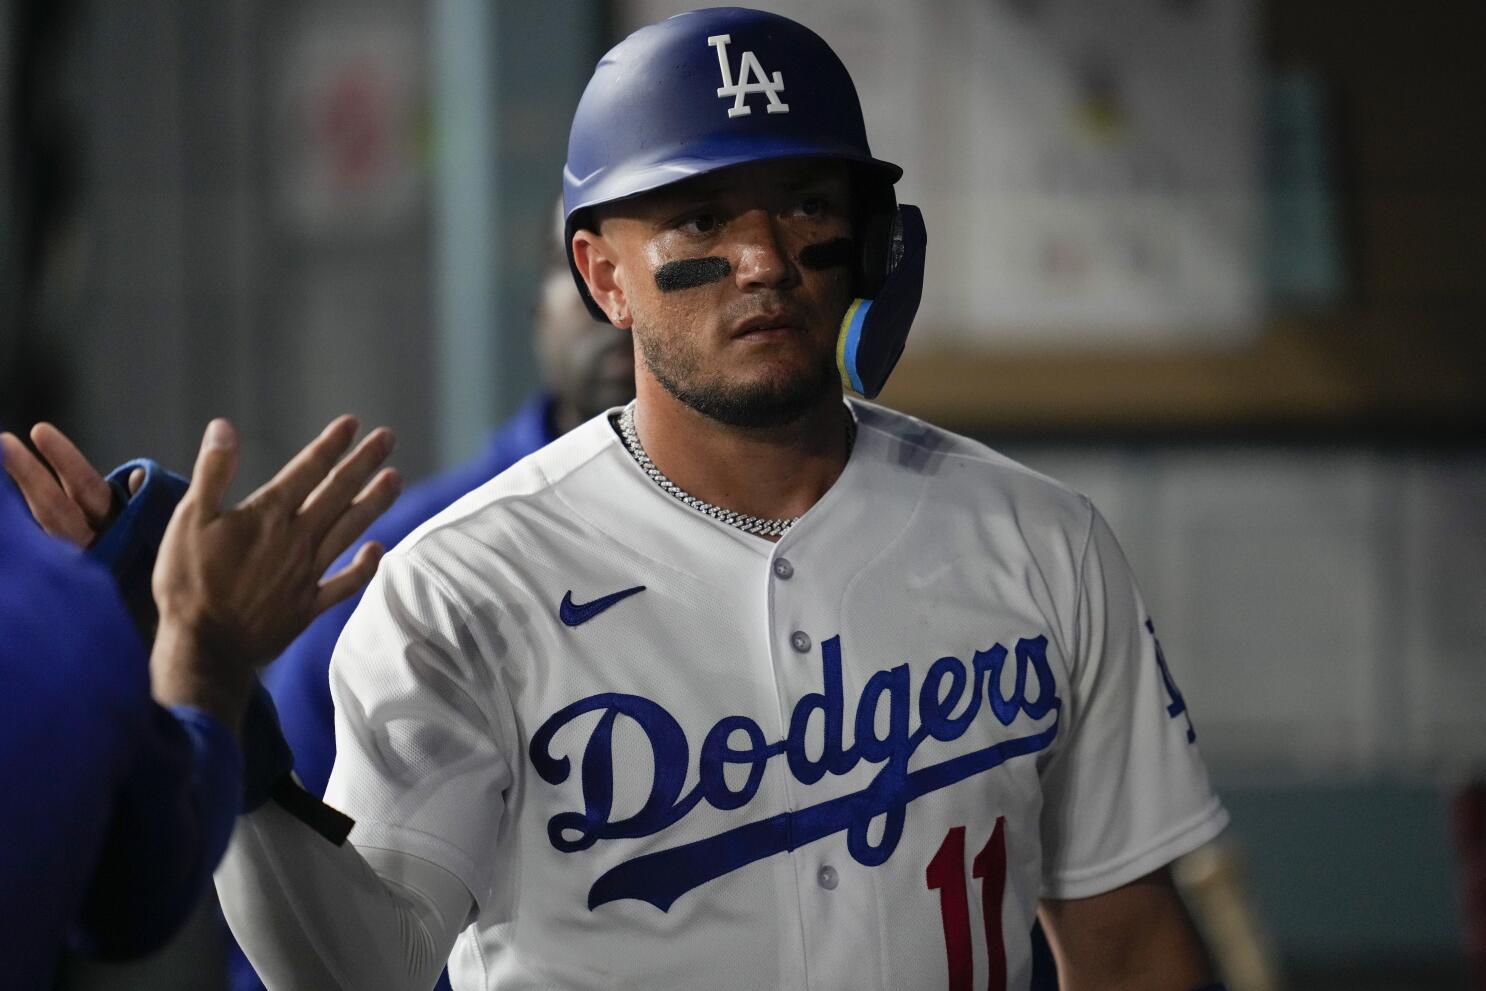 Miguel Rojas pushes to be the complete player the Dodgers need